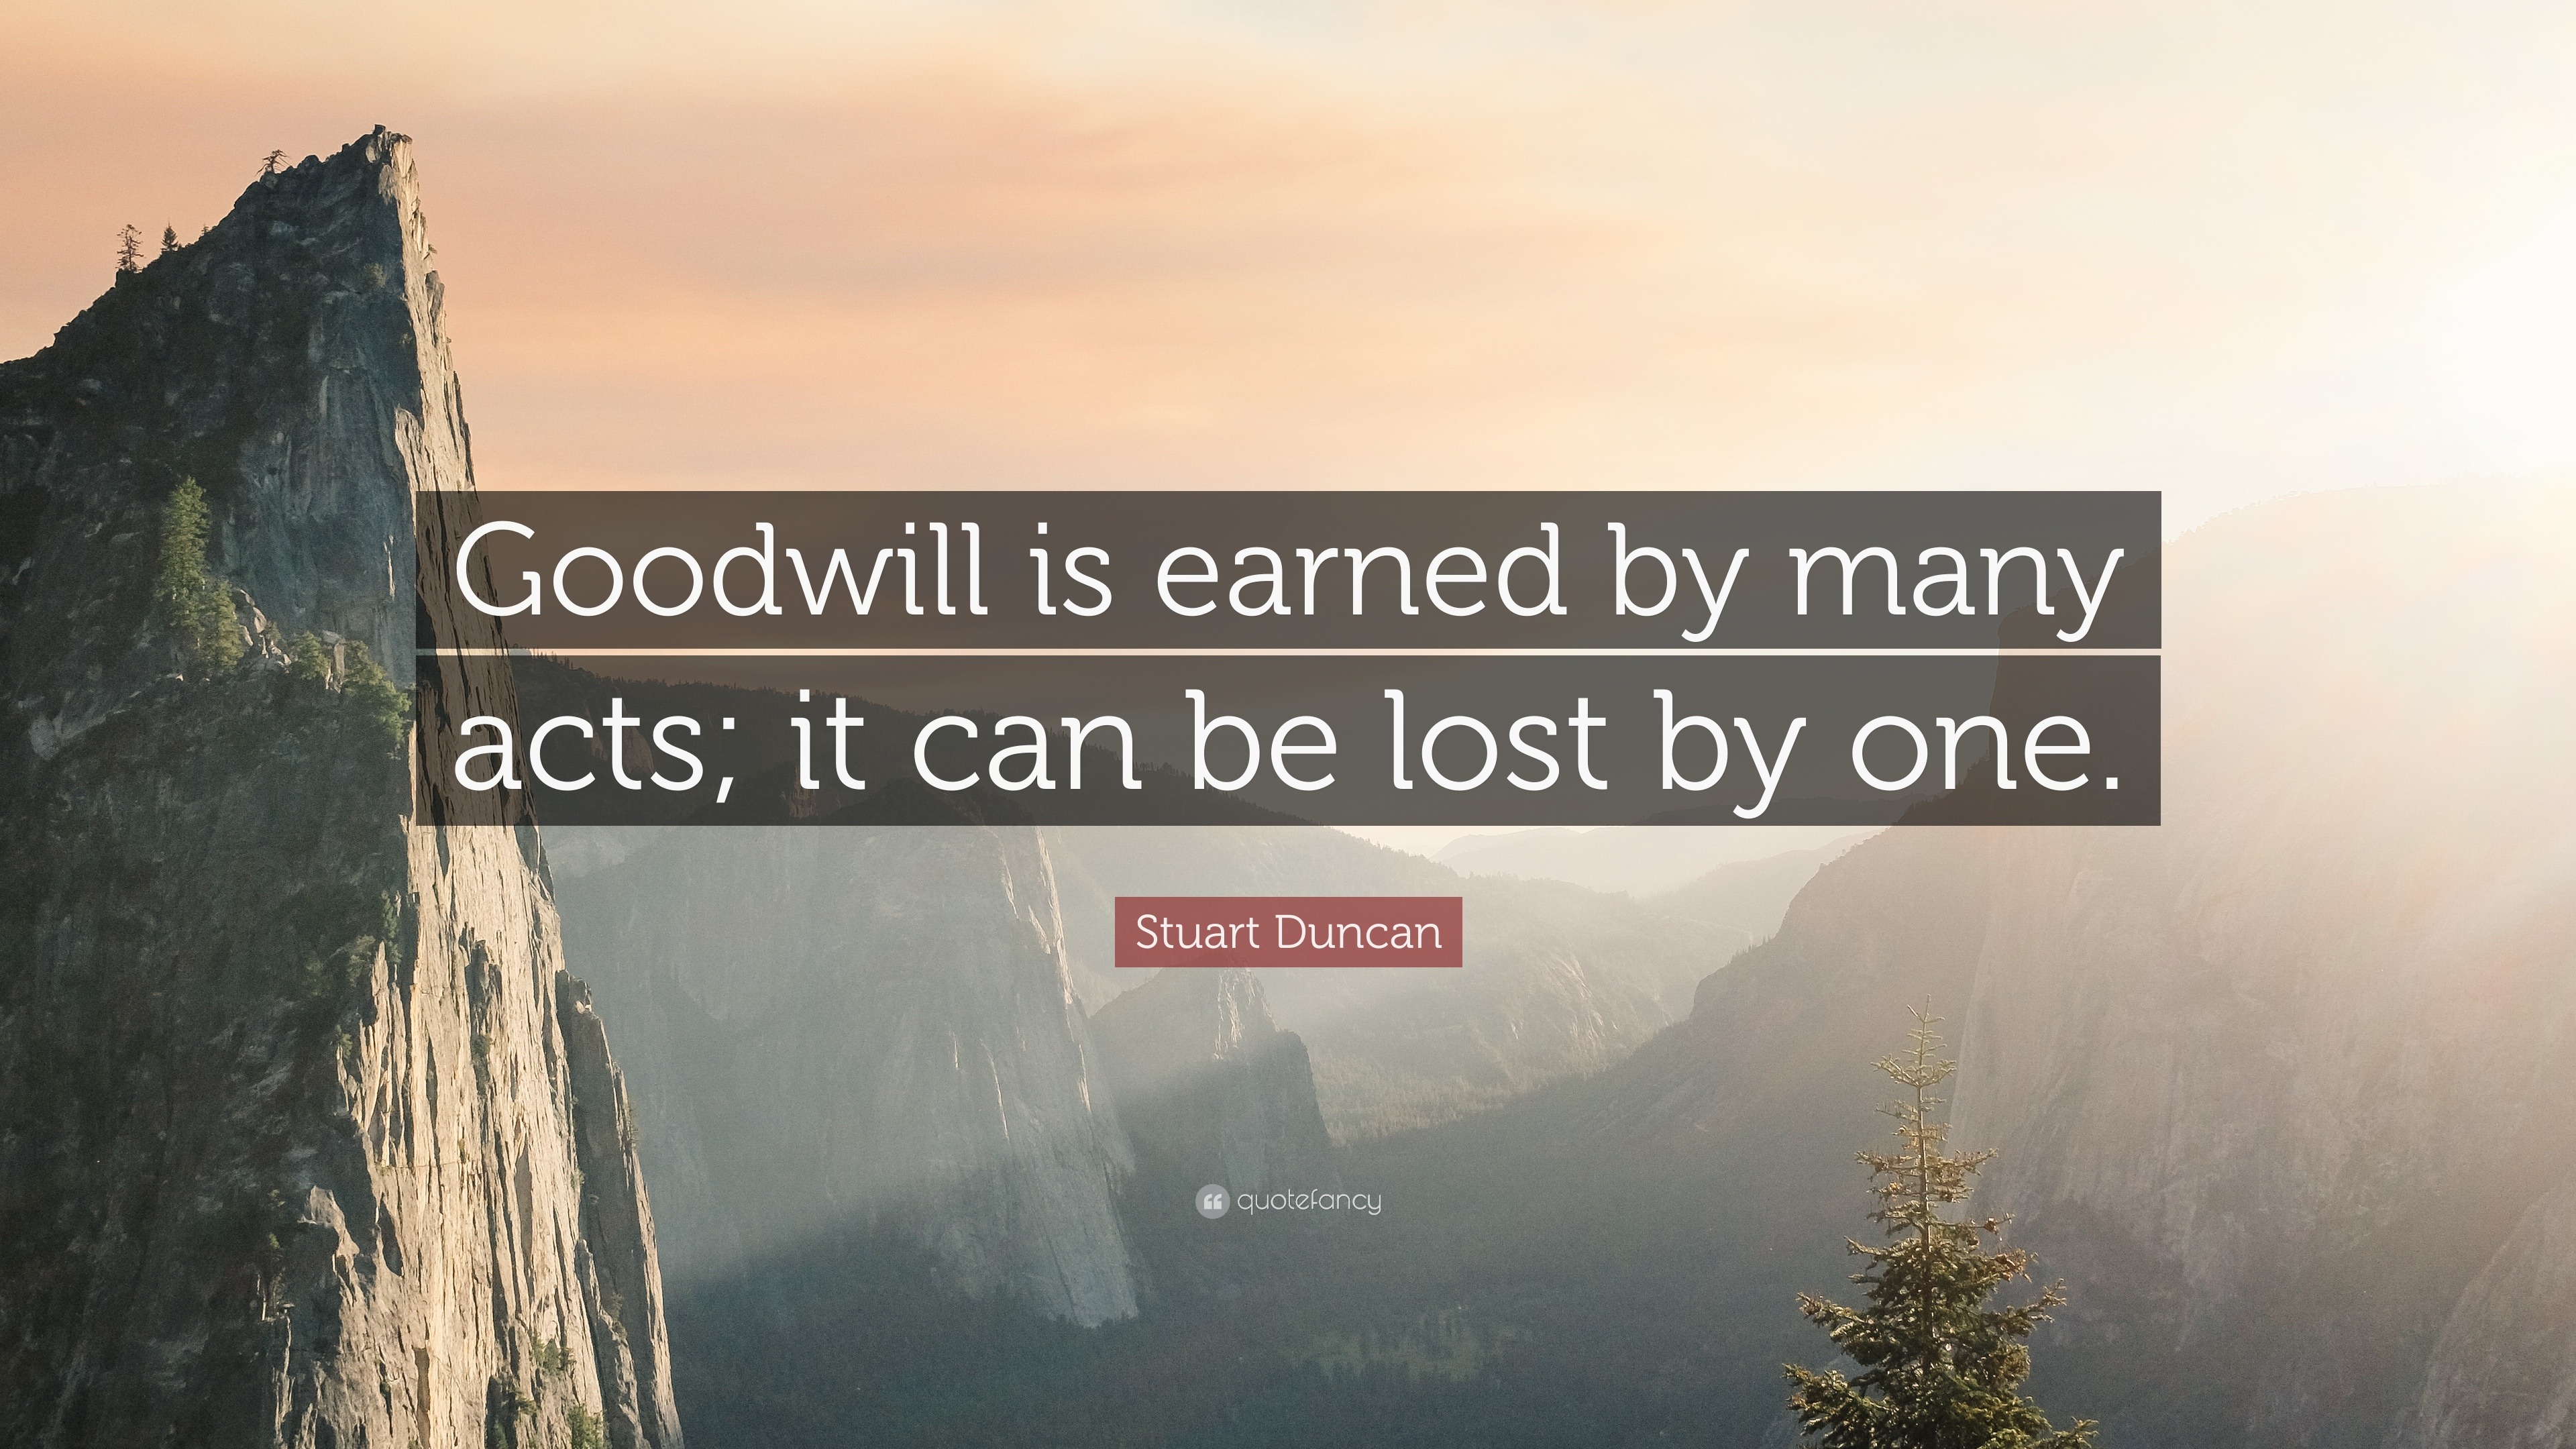 Stuart Duncan Quote: “Goodwill is earned by many acts; it can be lost by  one.”